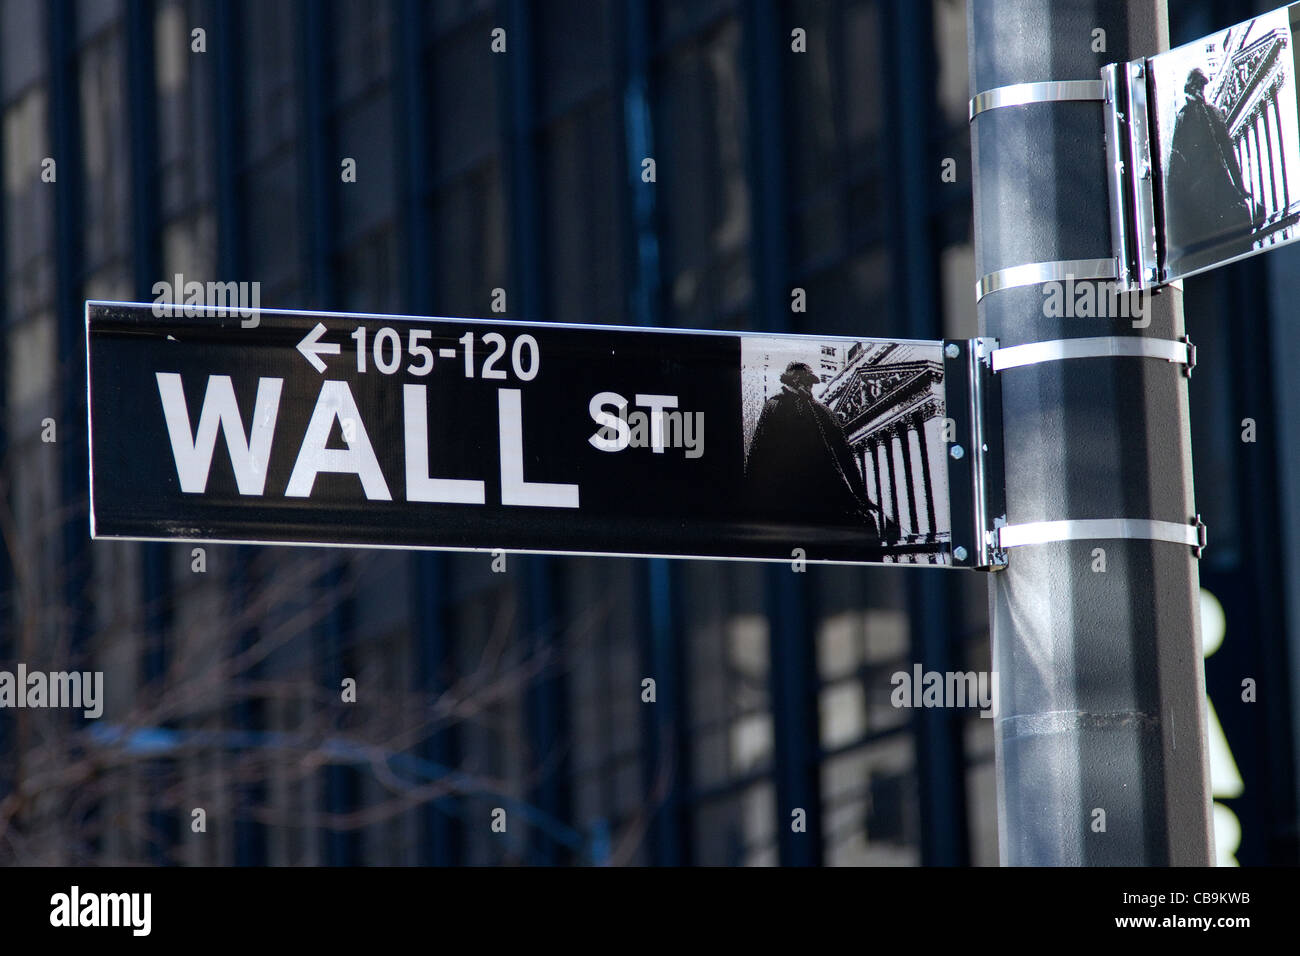 Wall street sign in New York city. Stock Photo